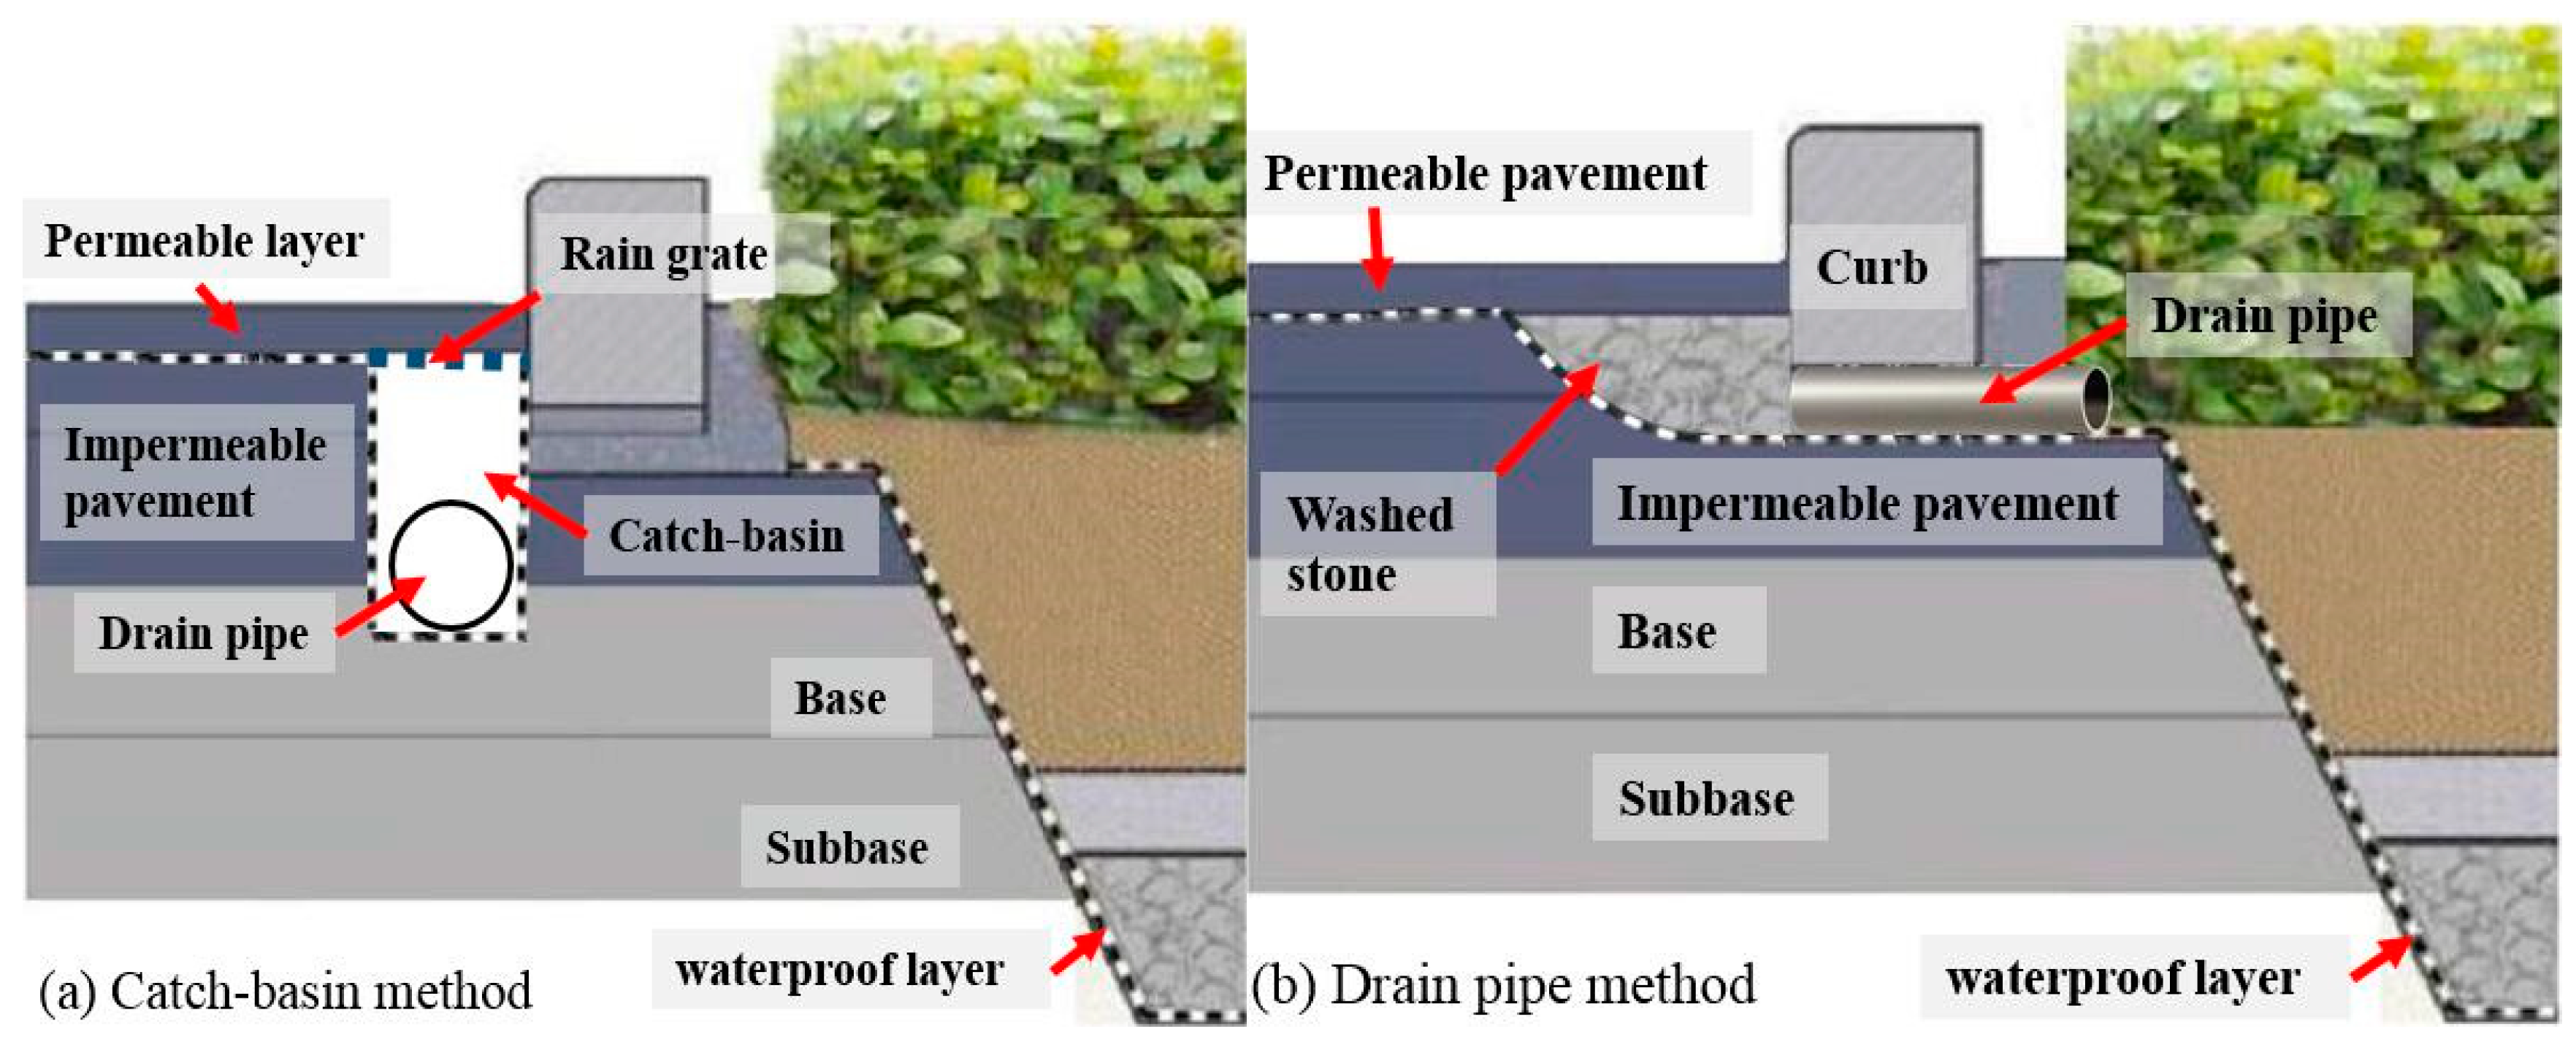 How permeable pavements boost environmental sustainability, Pavement  Management Services posted on the topic